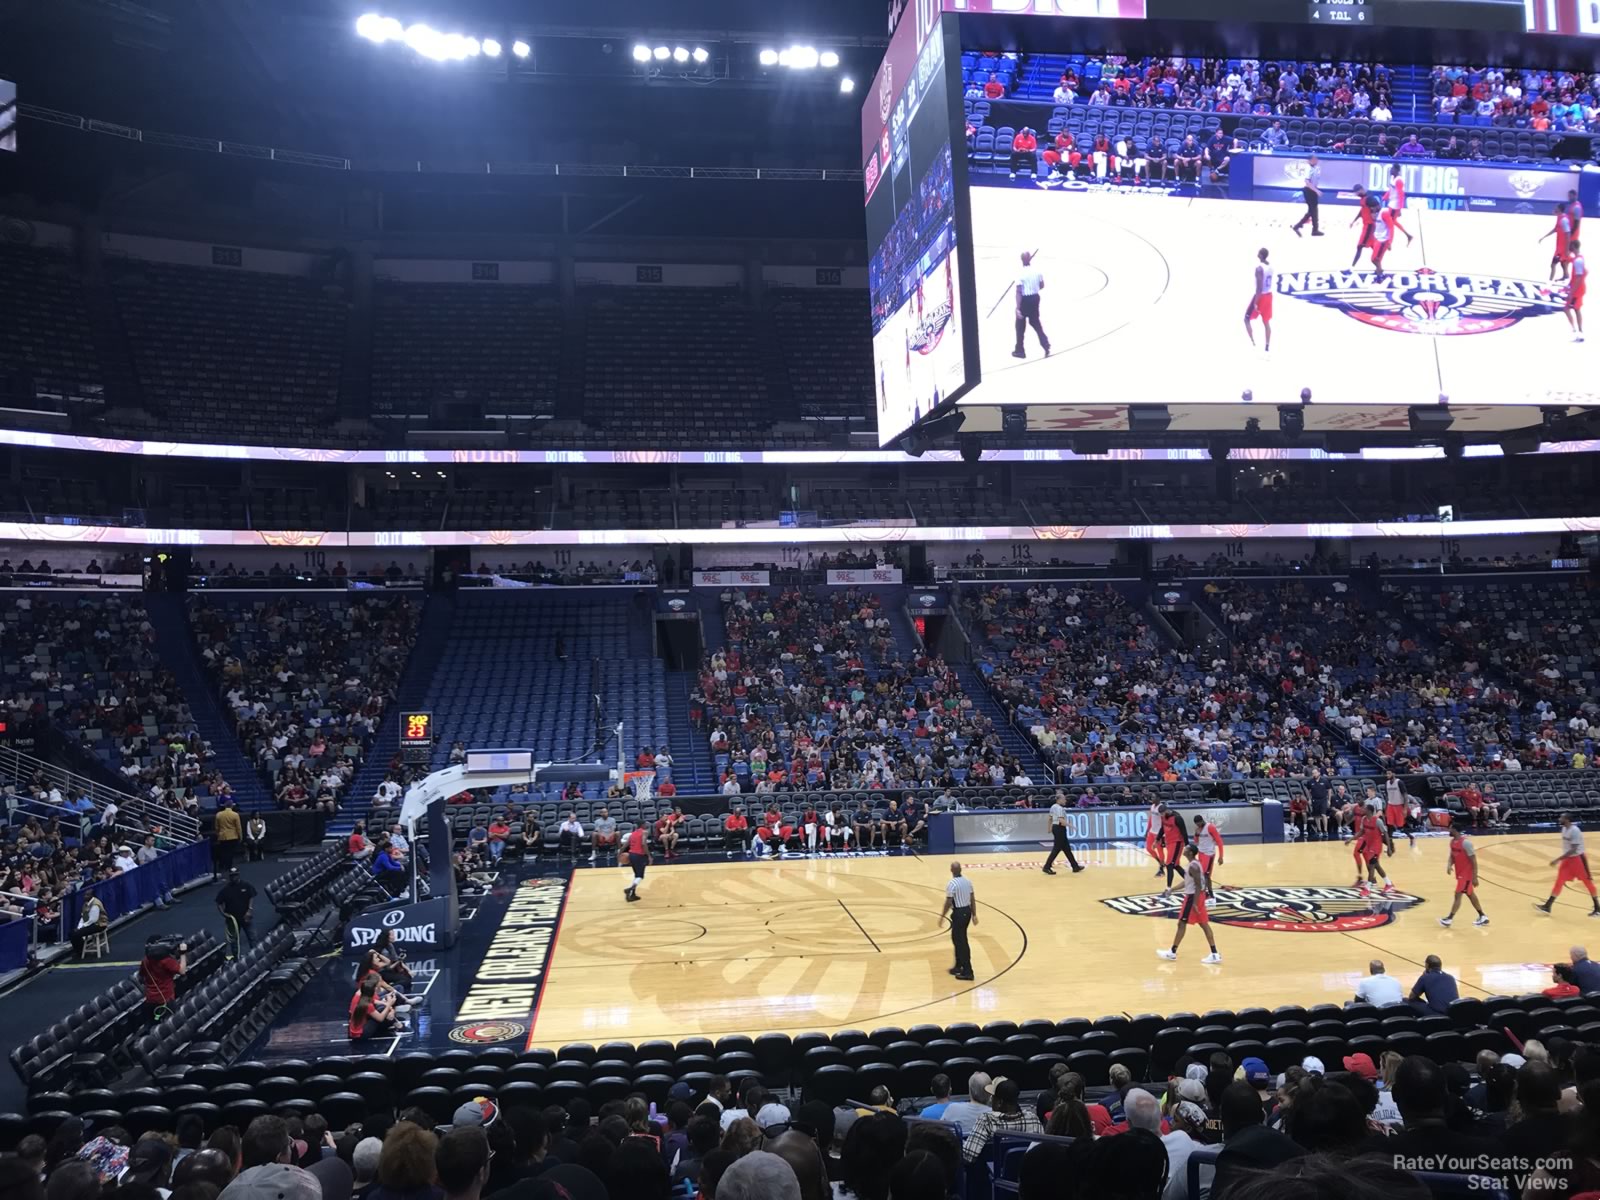 Smoothie King Center Seating Chart With Rows